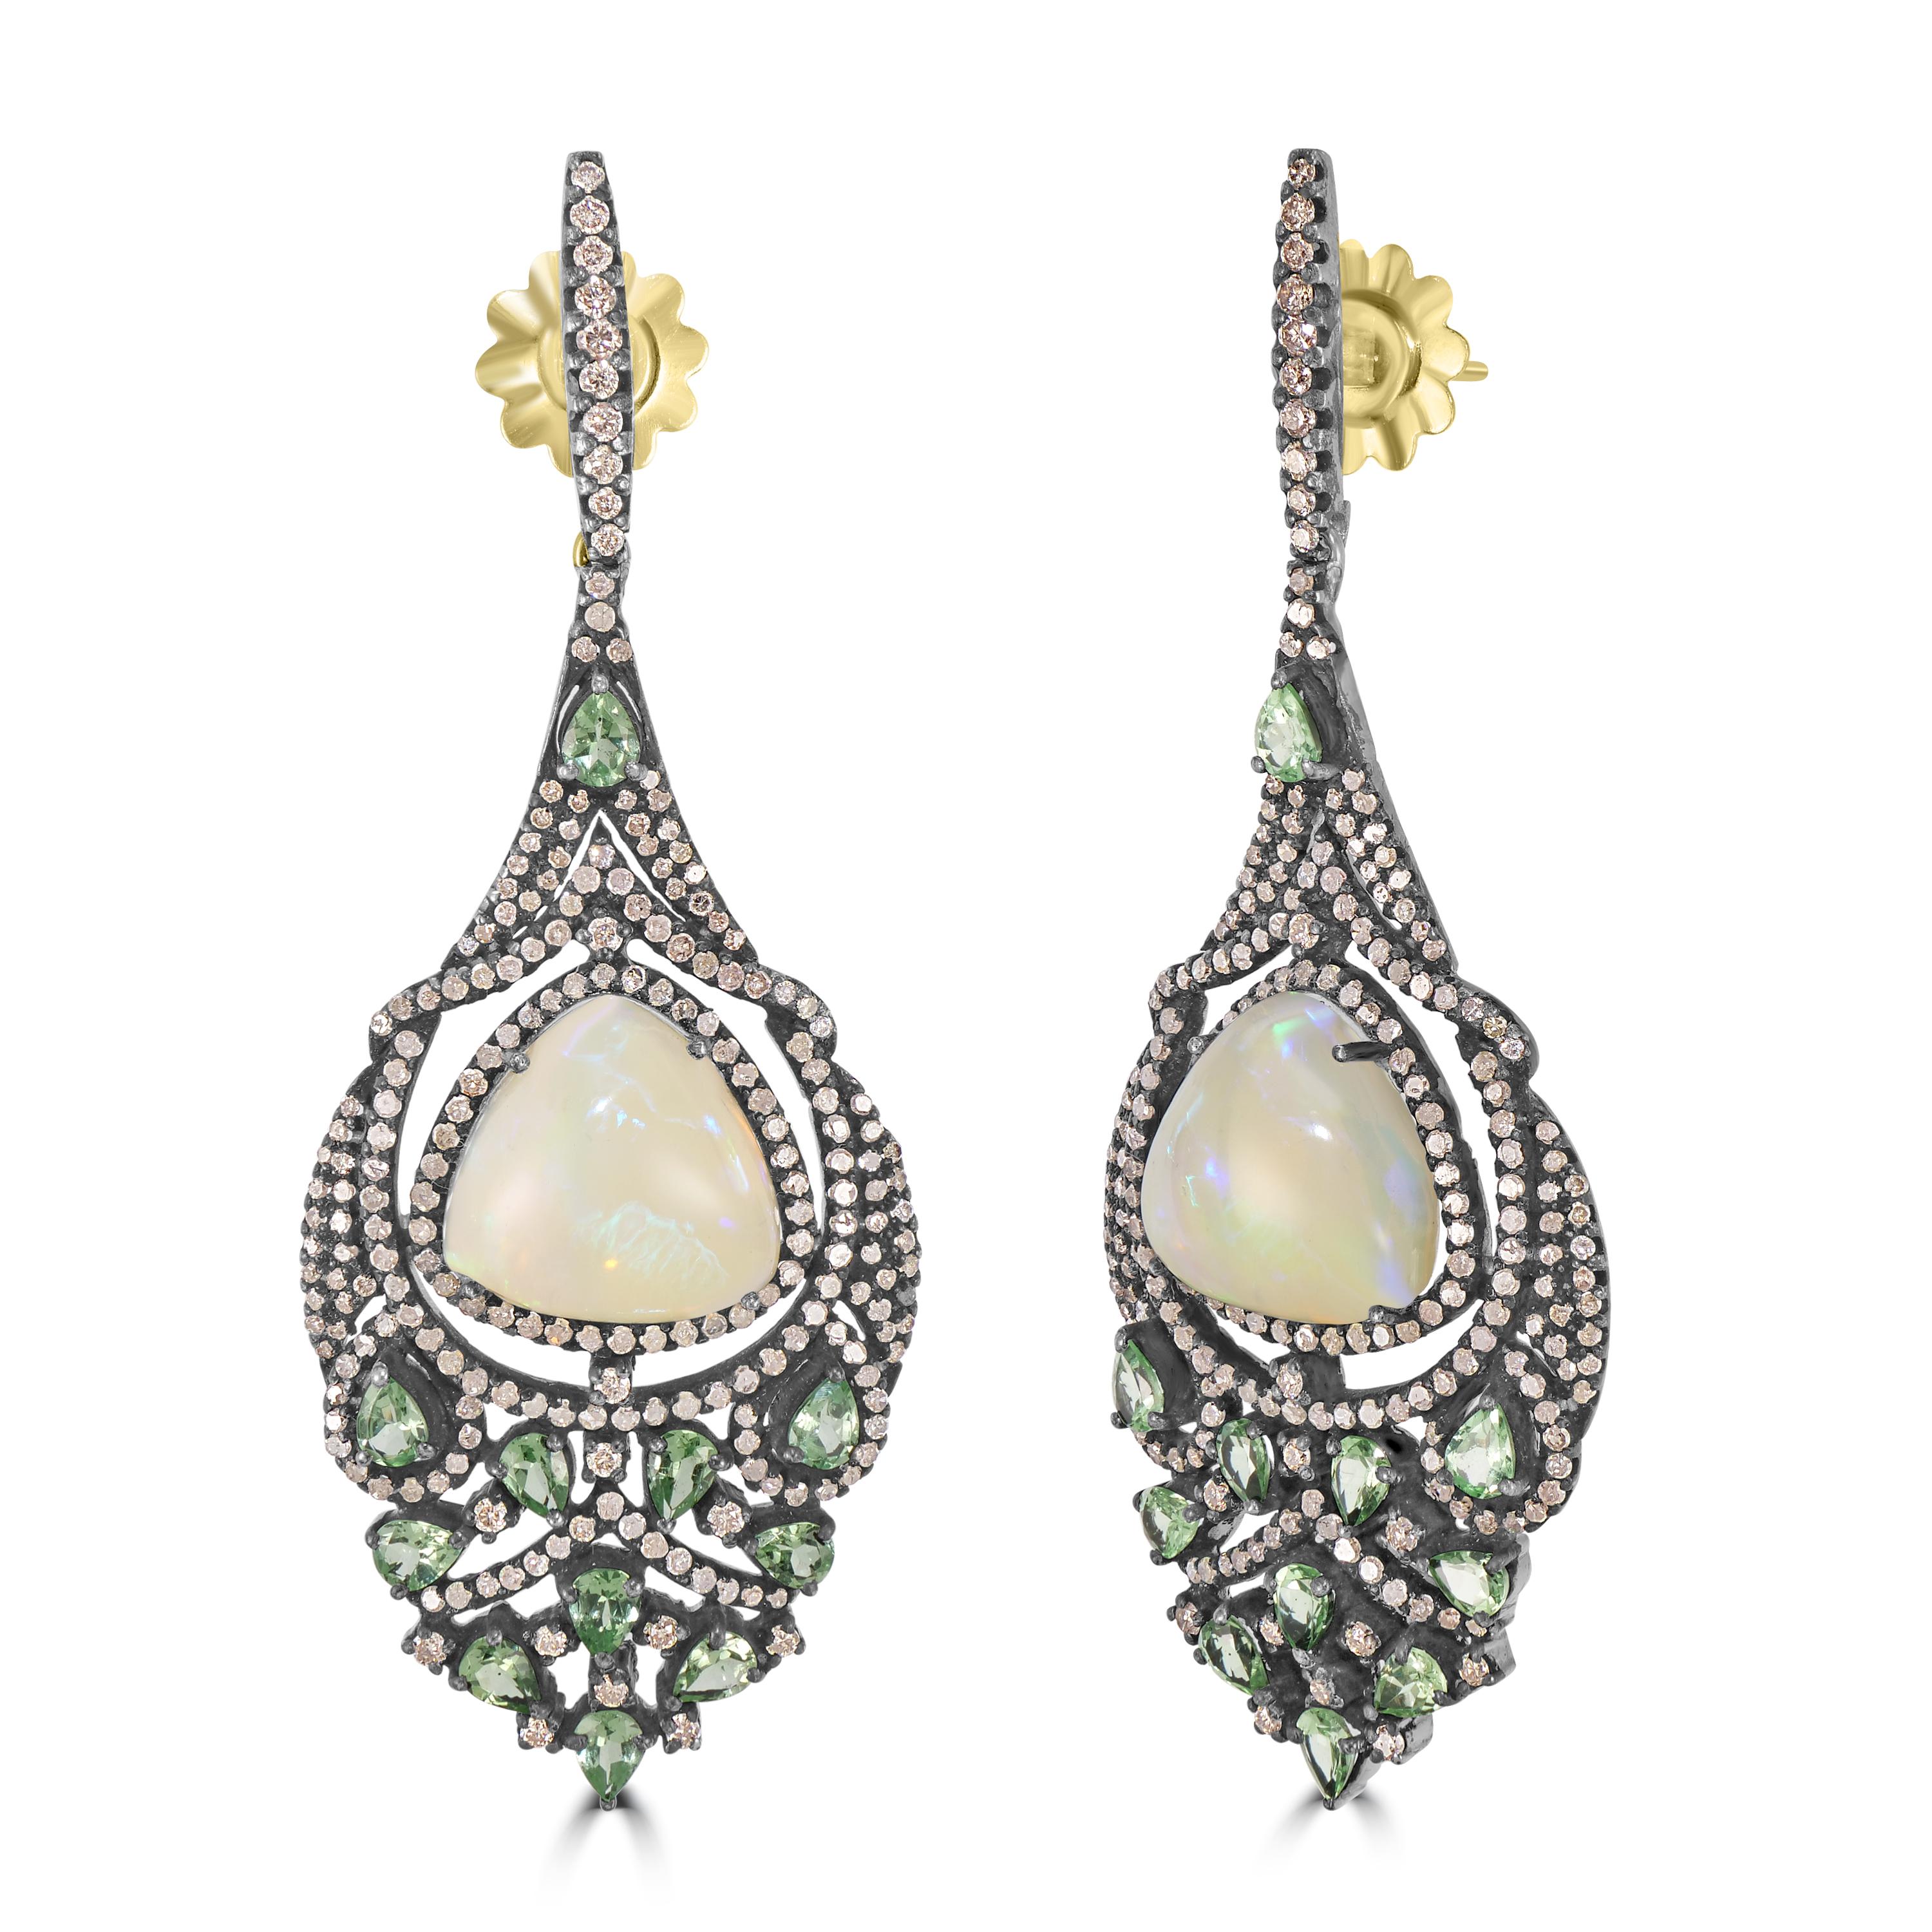 Introducing the resplendent Victorian 20.63 Cttw. Ethiopian Opal, Tsavorite, and Diamond Dangle Earrings—an exquisite dance of color and light that promises to enchant and captivate.

At the heart of these earrings is the mesmerizing Ethiopian opal,